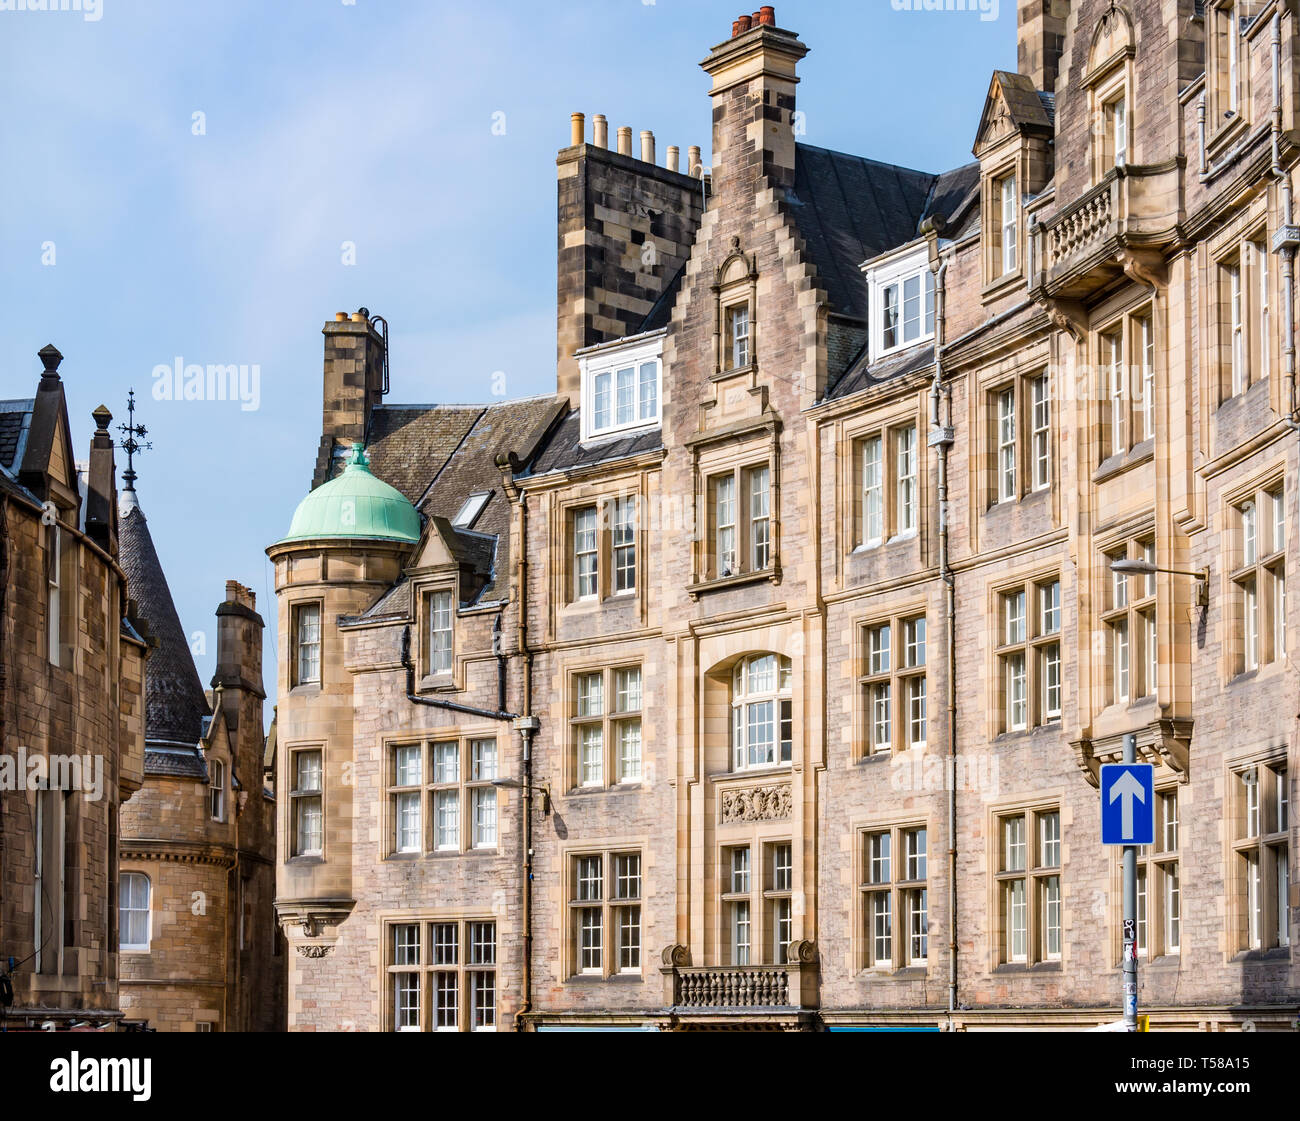 View of curved tenement buildings, Victoria Street, Edinburgh, Scotland, UK on sunny day with blue sky Stock Photo